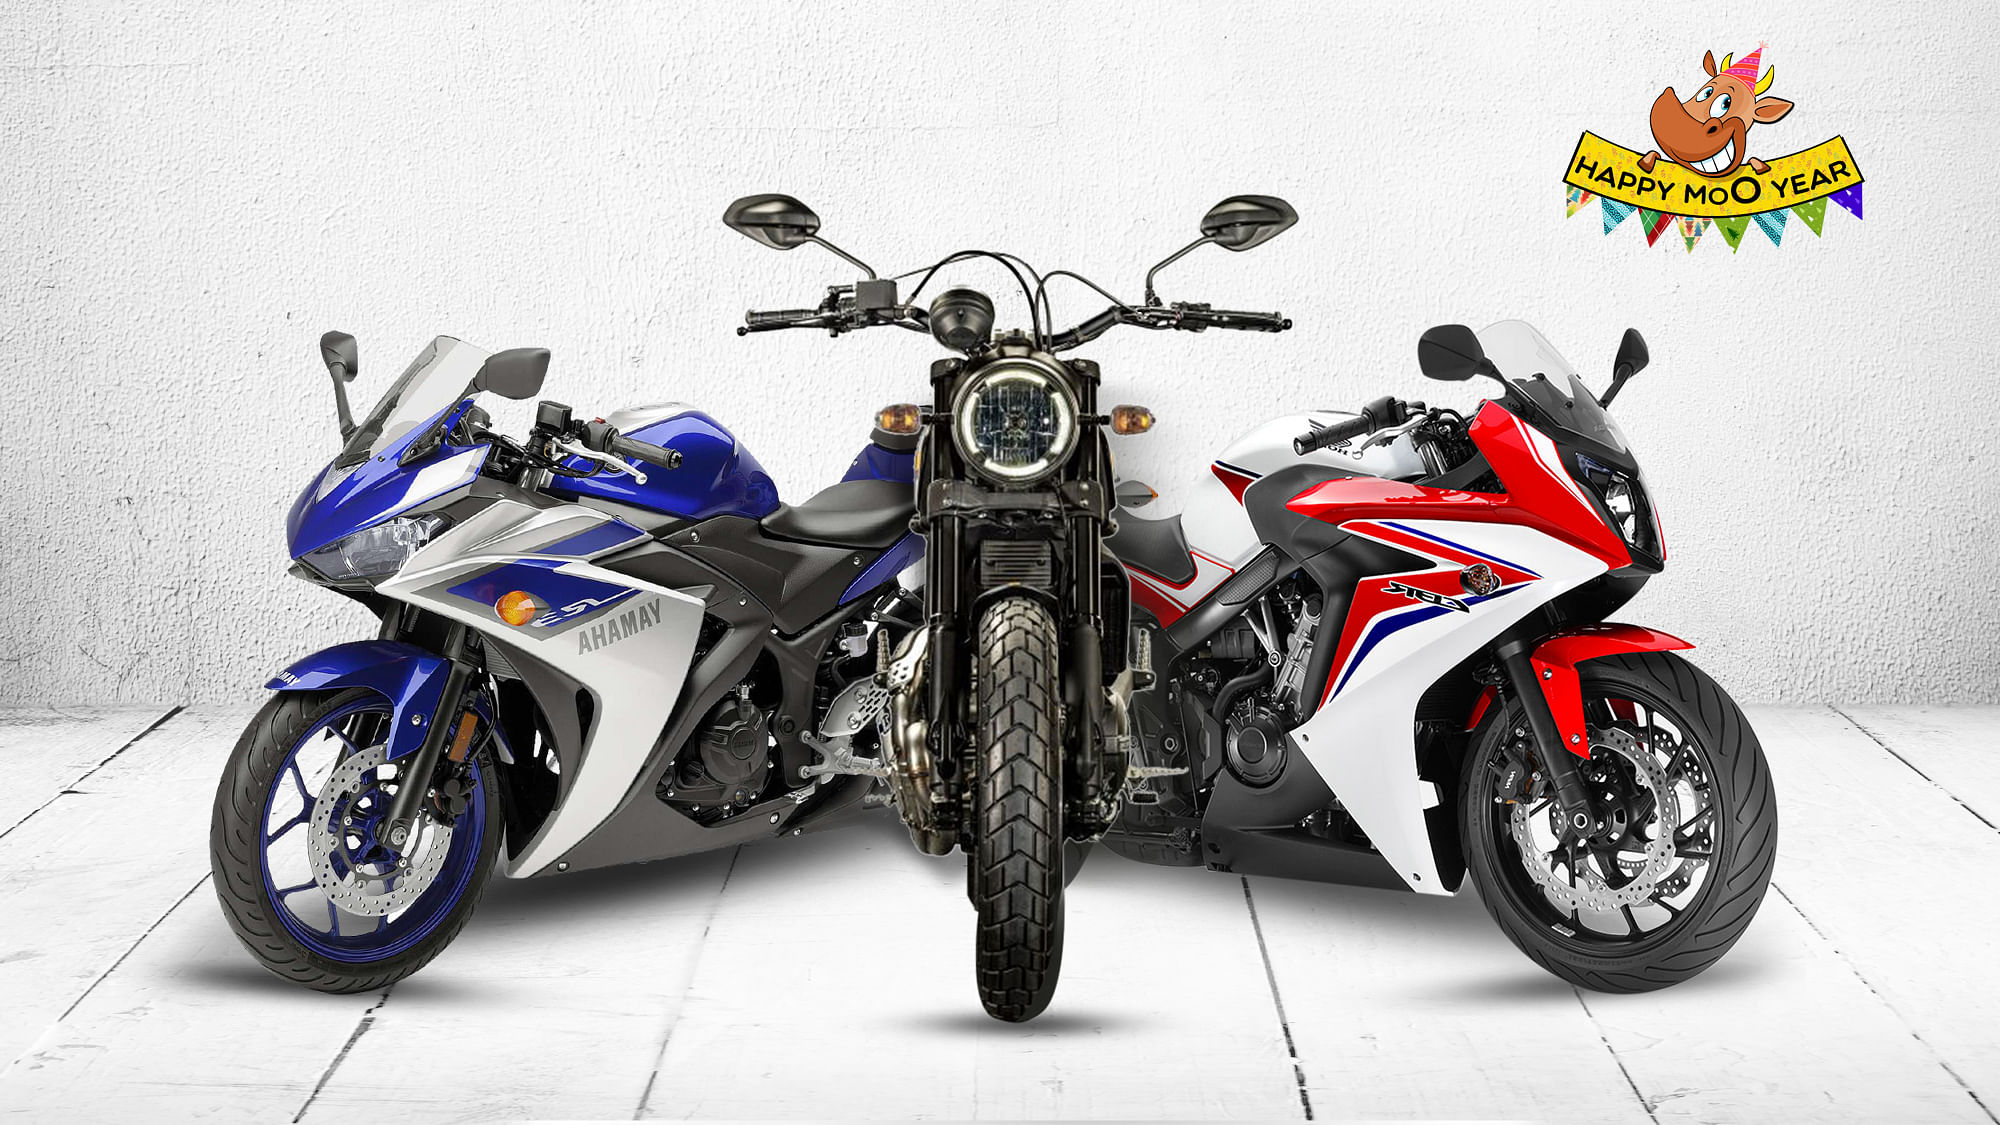  2015 saw a lot of new motorcycles, here are the top five of the year. (Photo: <b>The Quint</b>)